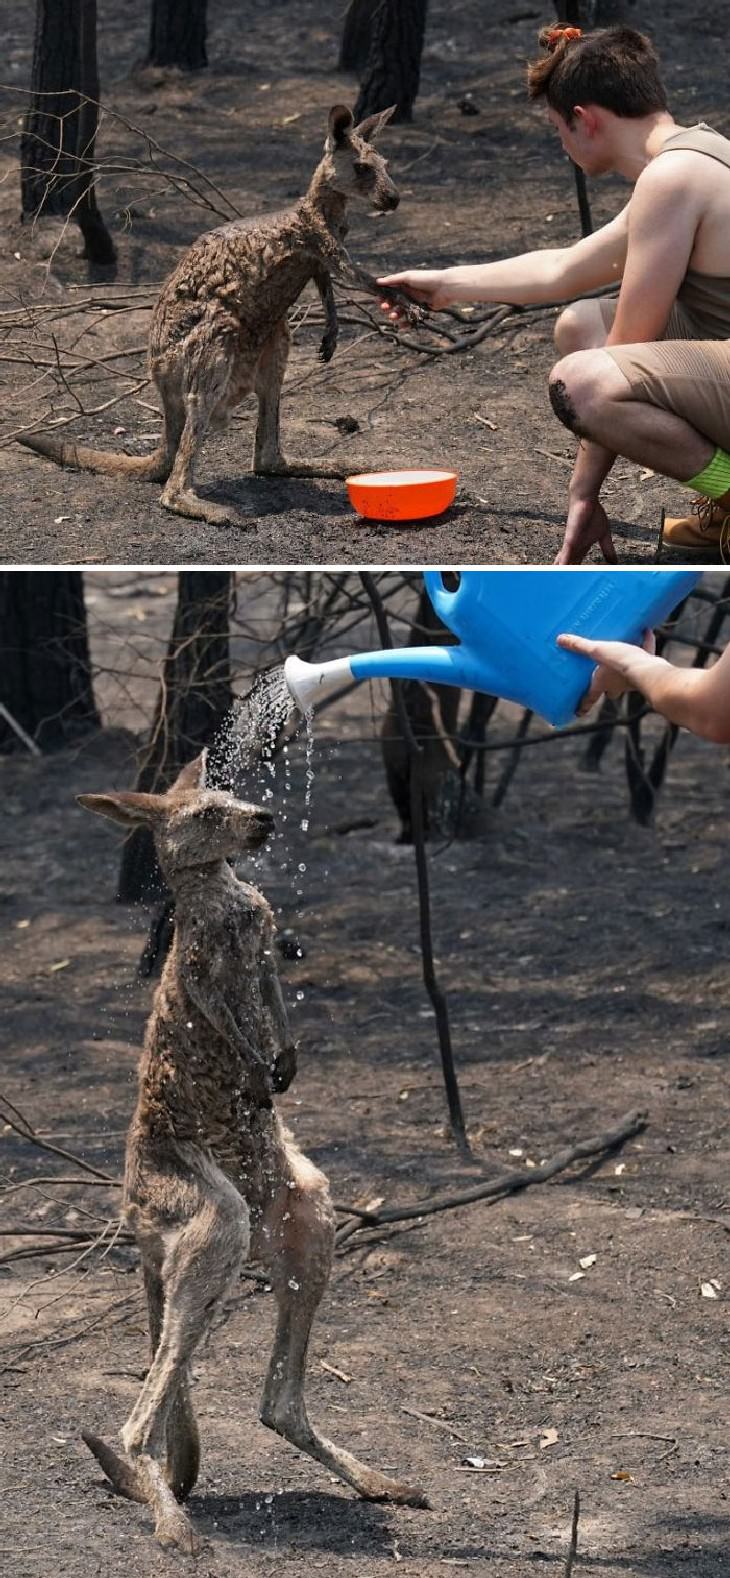 Australian Animals Saved from Fires Kangaroo showered with water after approaching humans to seek help